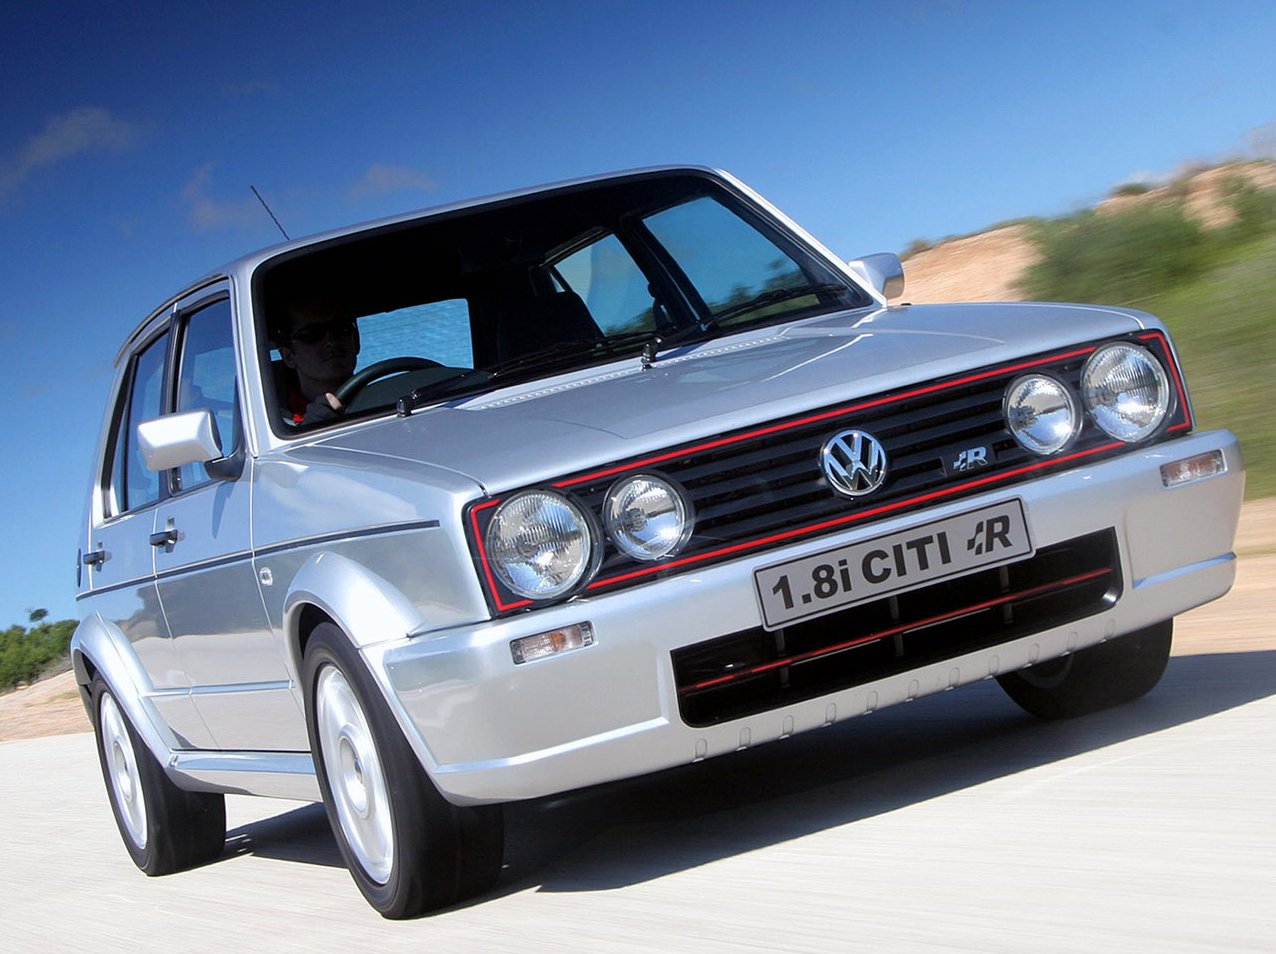 2006 Vw Citi Golf R Classic Cars Today Online